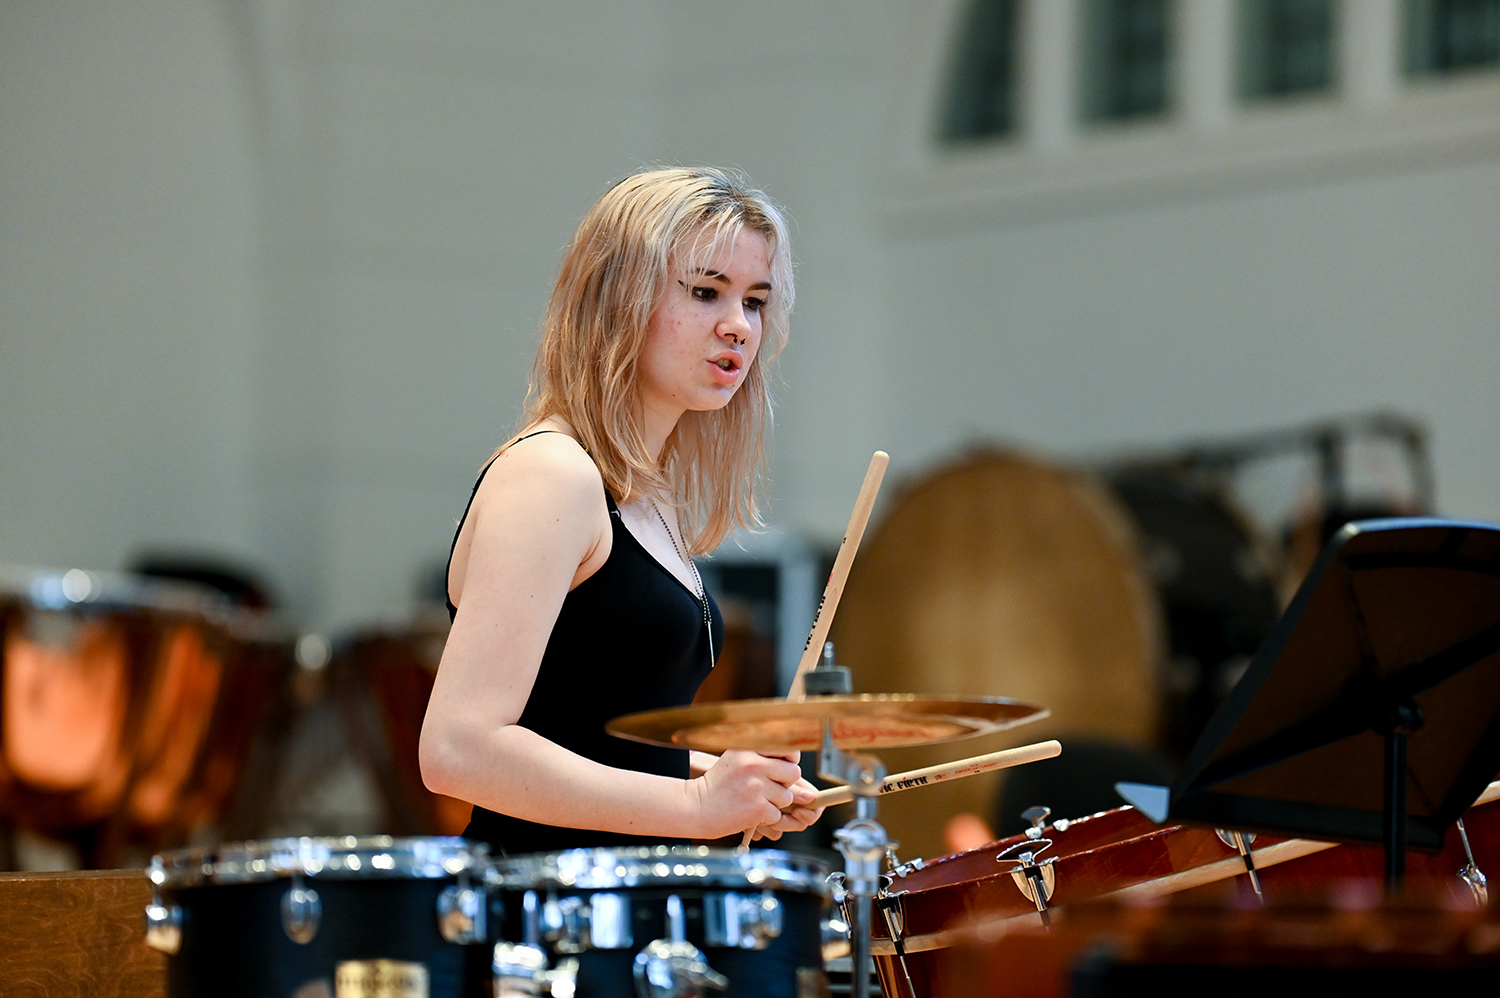 A woman with a black top playing the drums